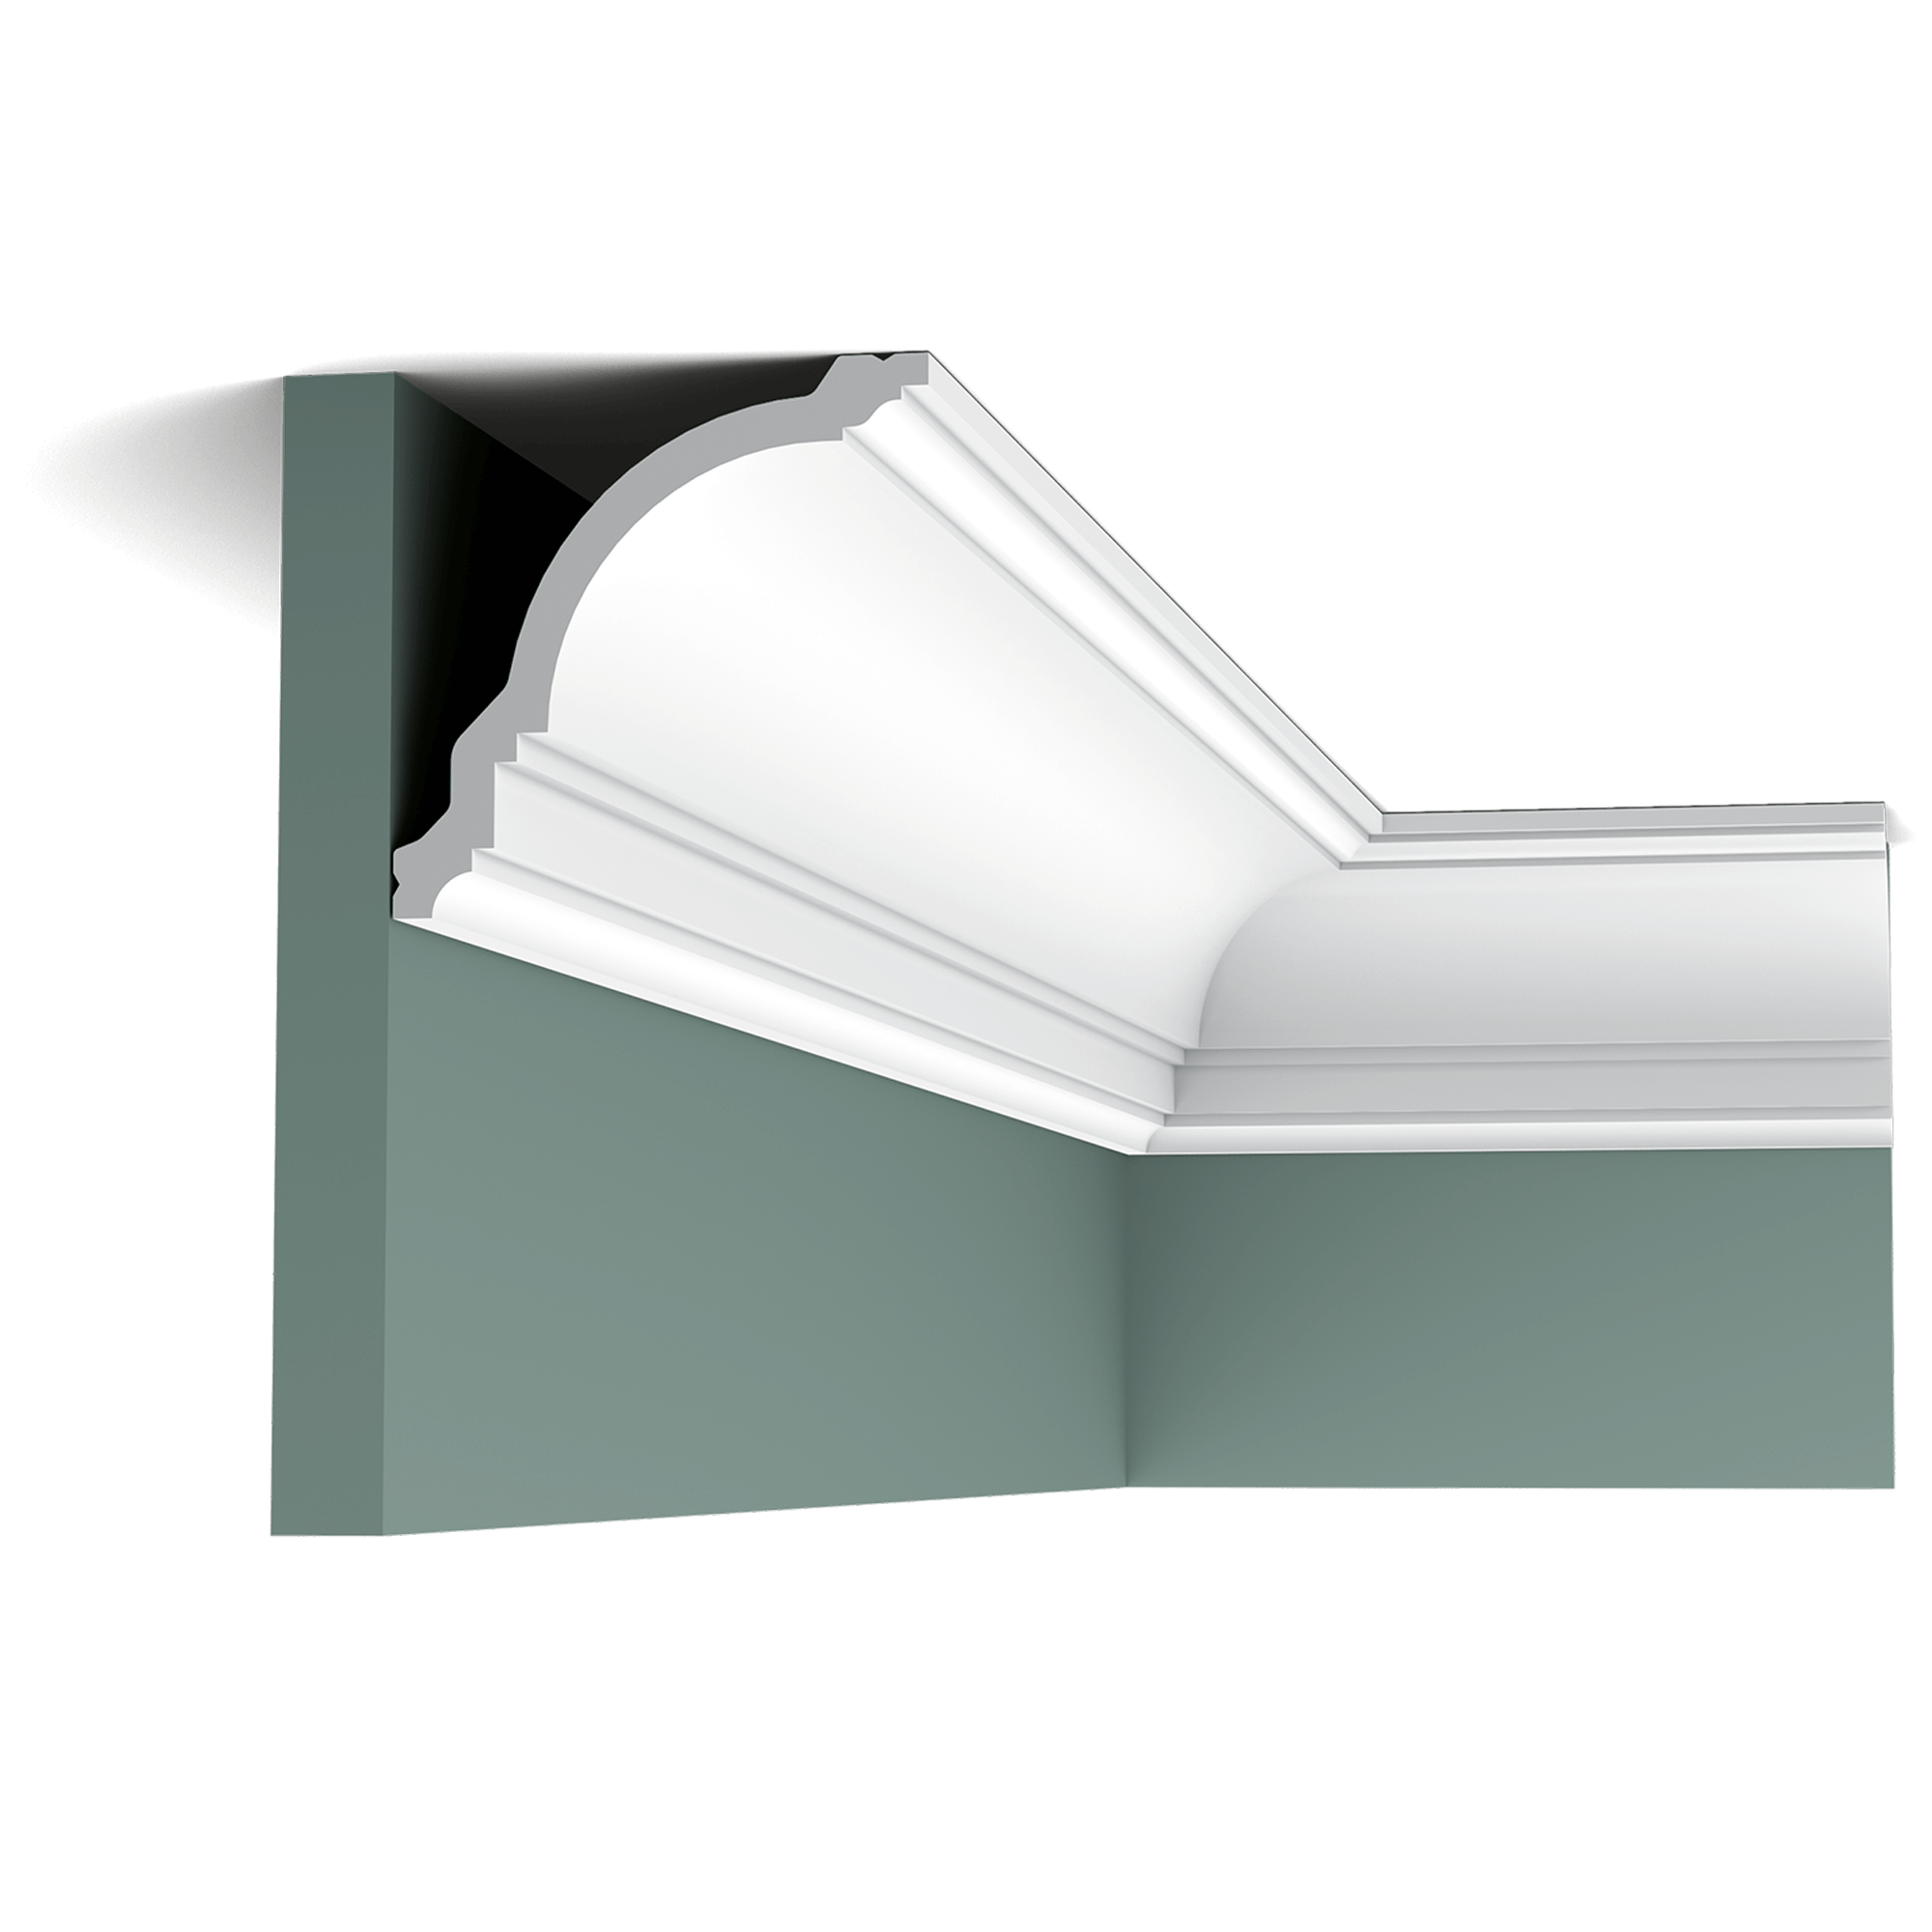 This elegant cornice moulding creates a subtle transition from wall to ceiling. This bestseller fits a variety of interiors.